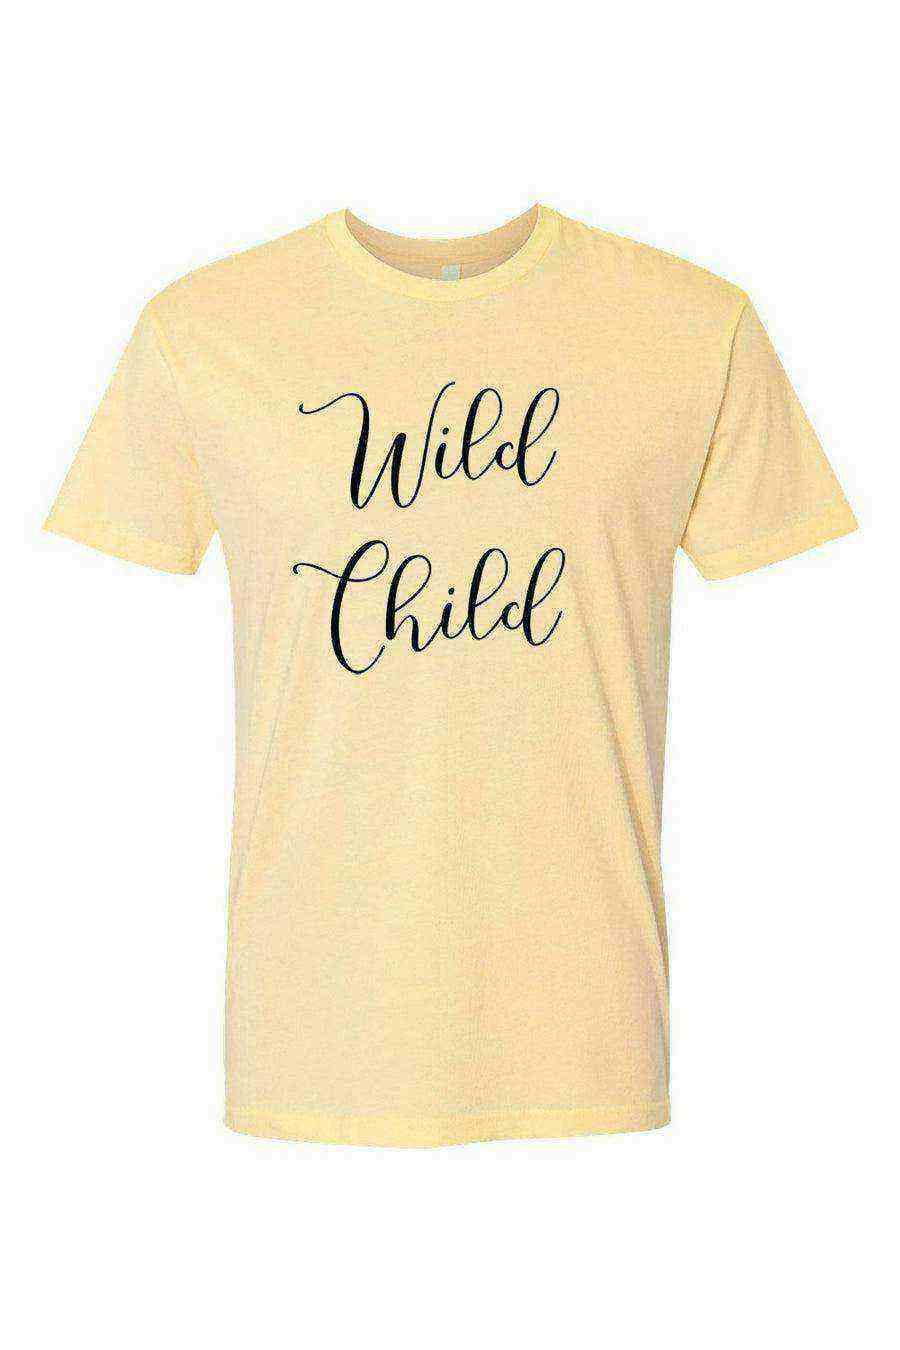 Youth | Wild Child Shirt | Born To Be Wild - Dylan's Tees